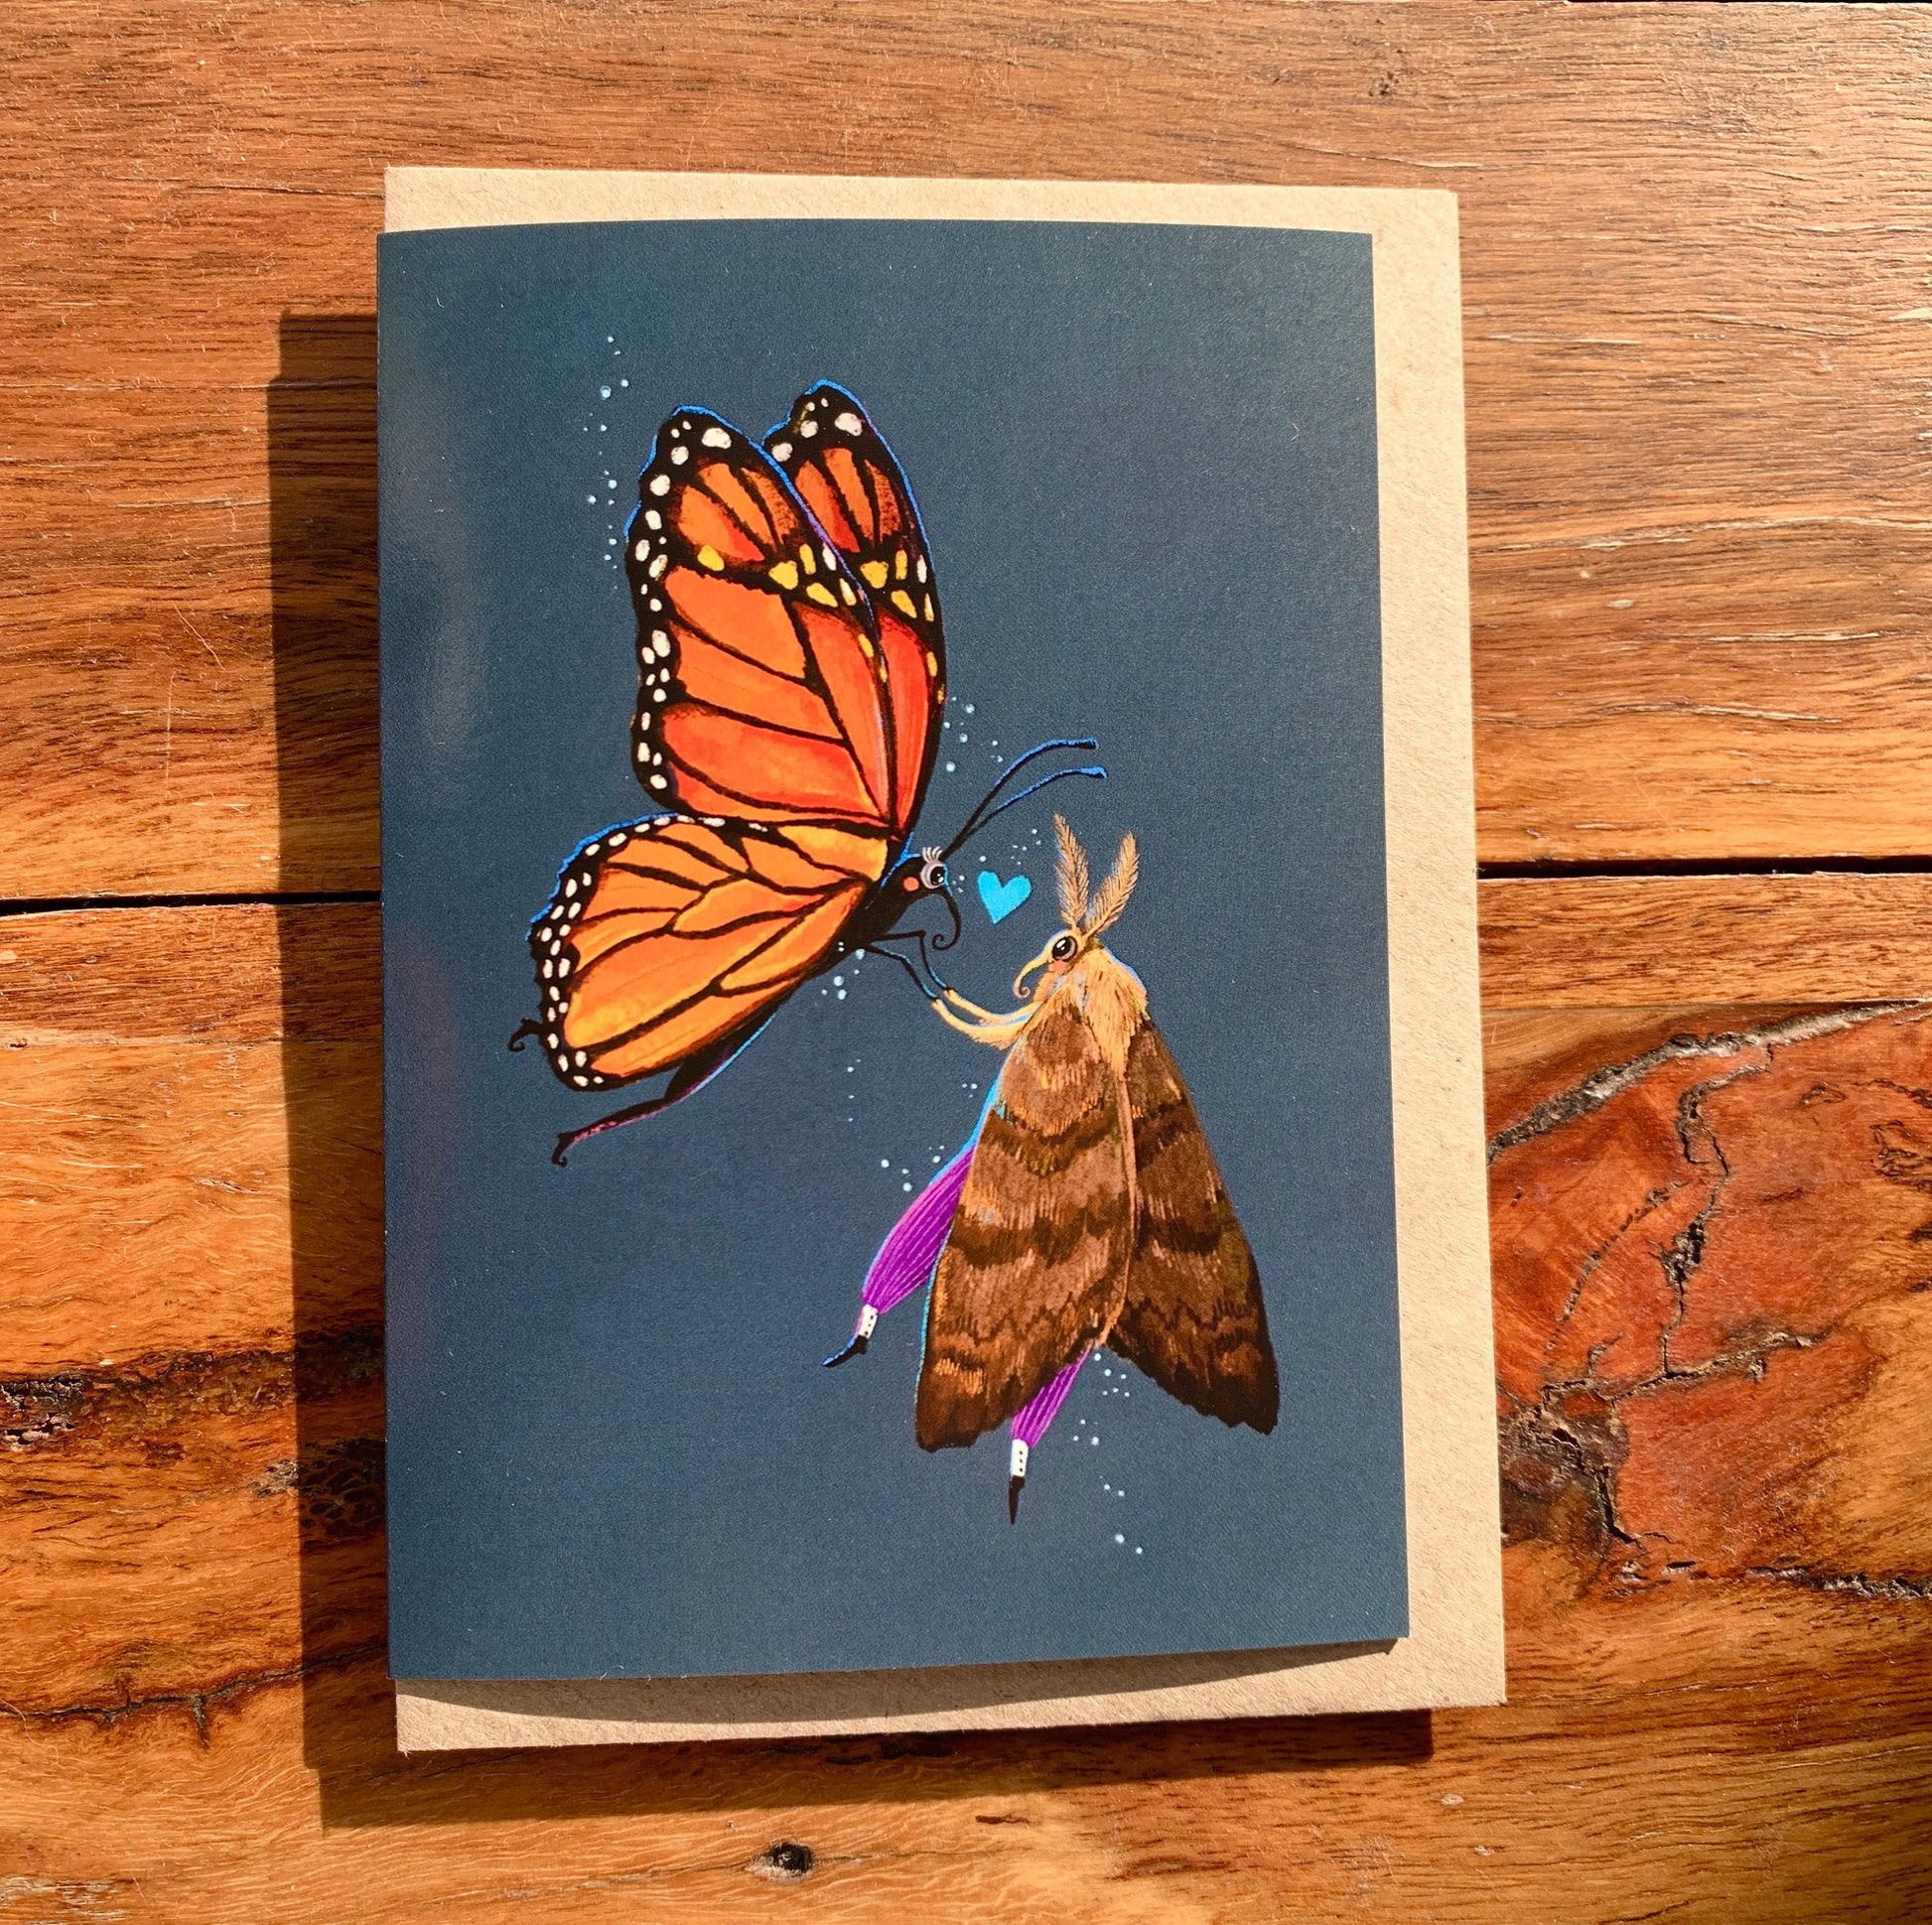 Anna Seed Art | Greeting Card - Butterfly & Moth. Cute illustration